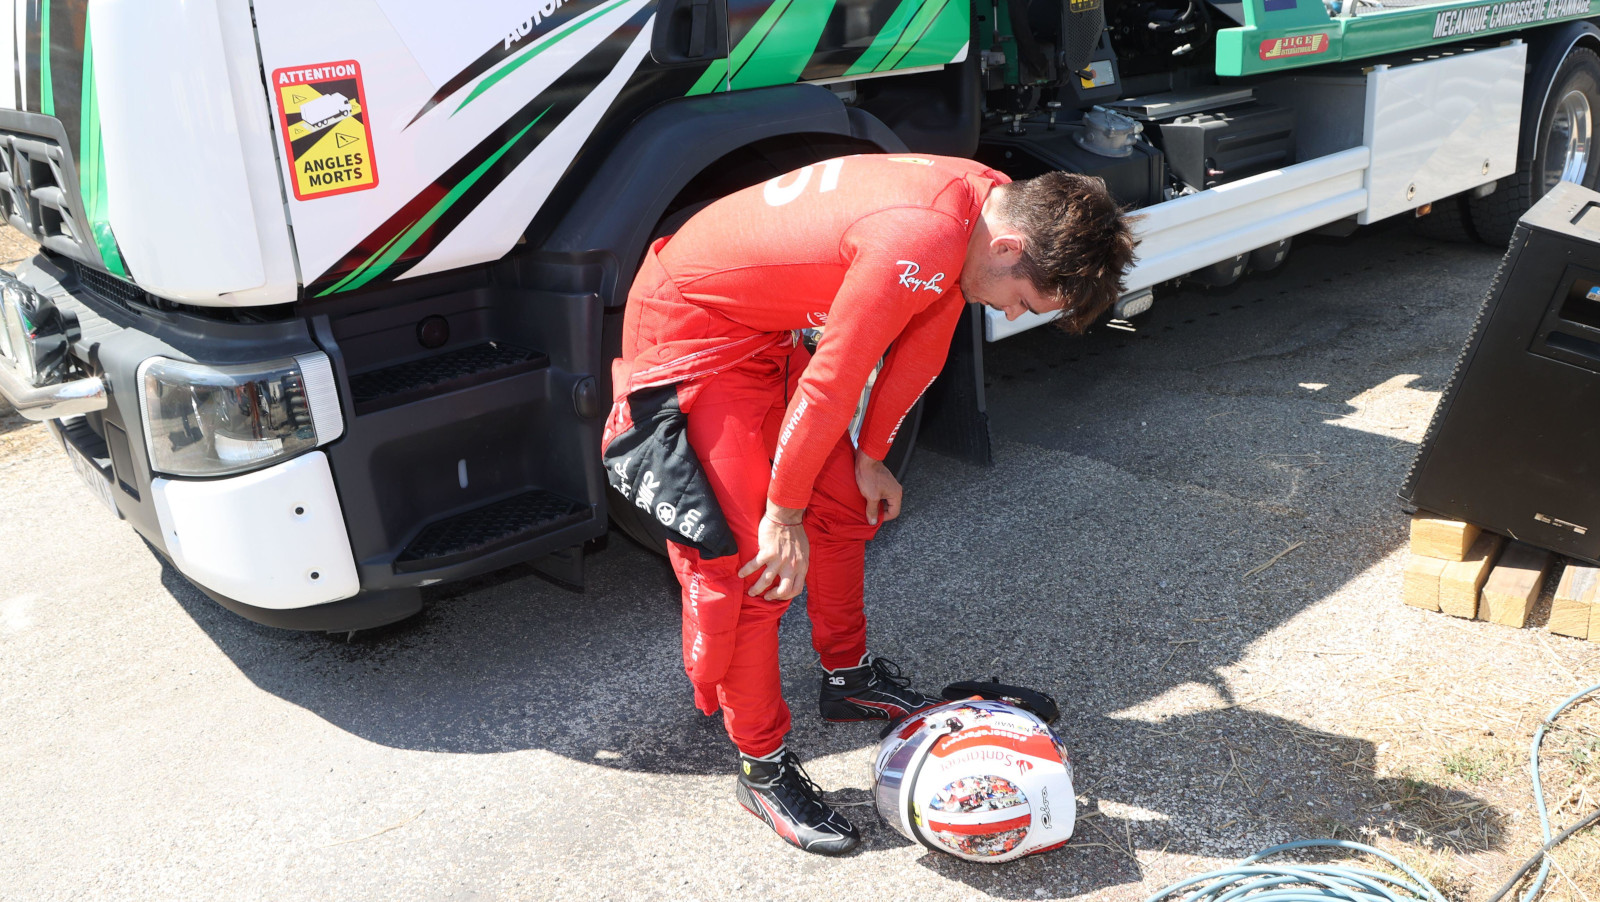 Charles Leclerc has his hands on his knees after his crash. France July 2022